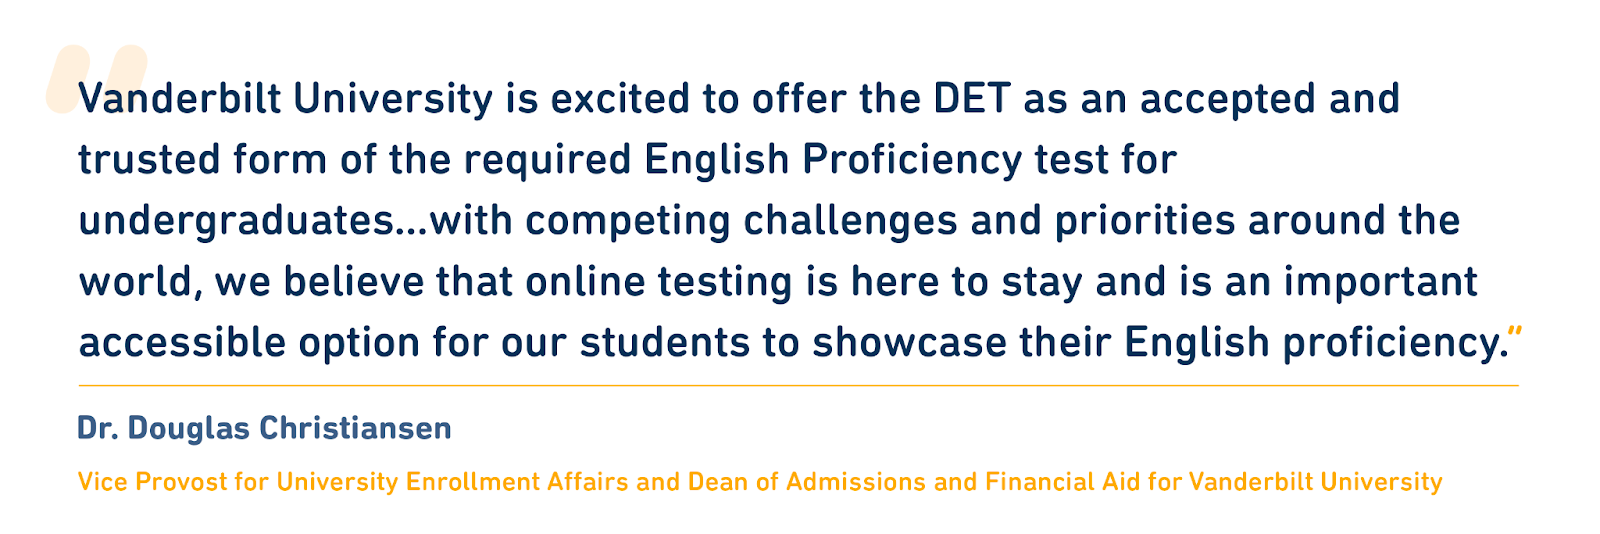 Quote from Dr. Douglas Christiansen. “Vanderbilt University is excited to offer the DET as an accepted and trusted form of the required English Proficiency test for undergraduates,” said Dr. Christiansen. “With competing challenges and priorities around the world, we believe that online testing is here to stay and is an important accessible option for our students to showcase their English proficiency.”